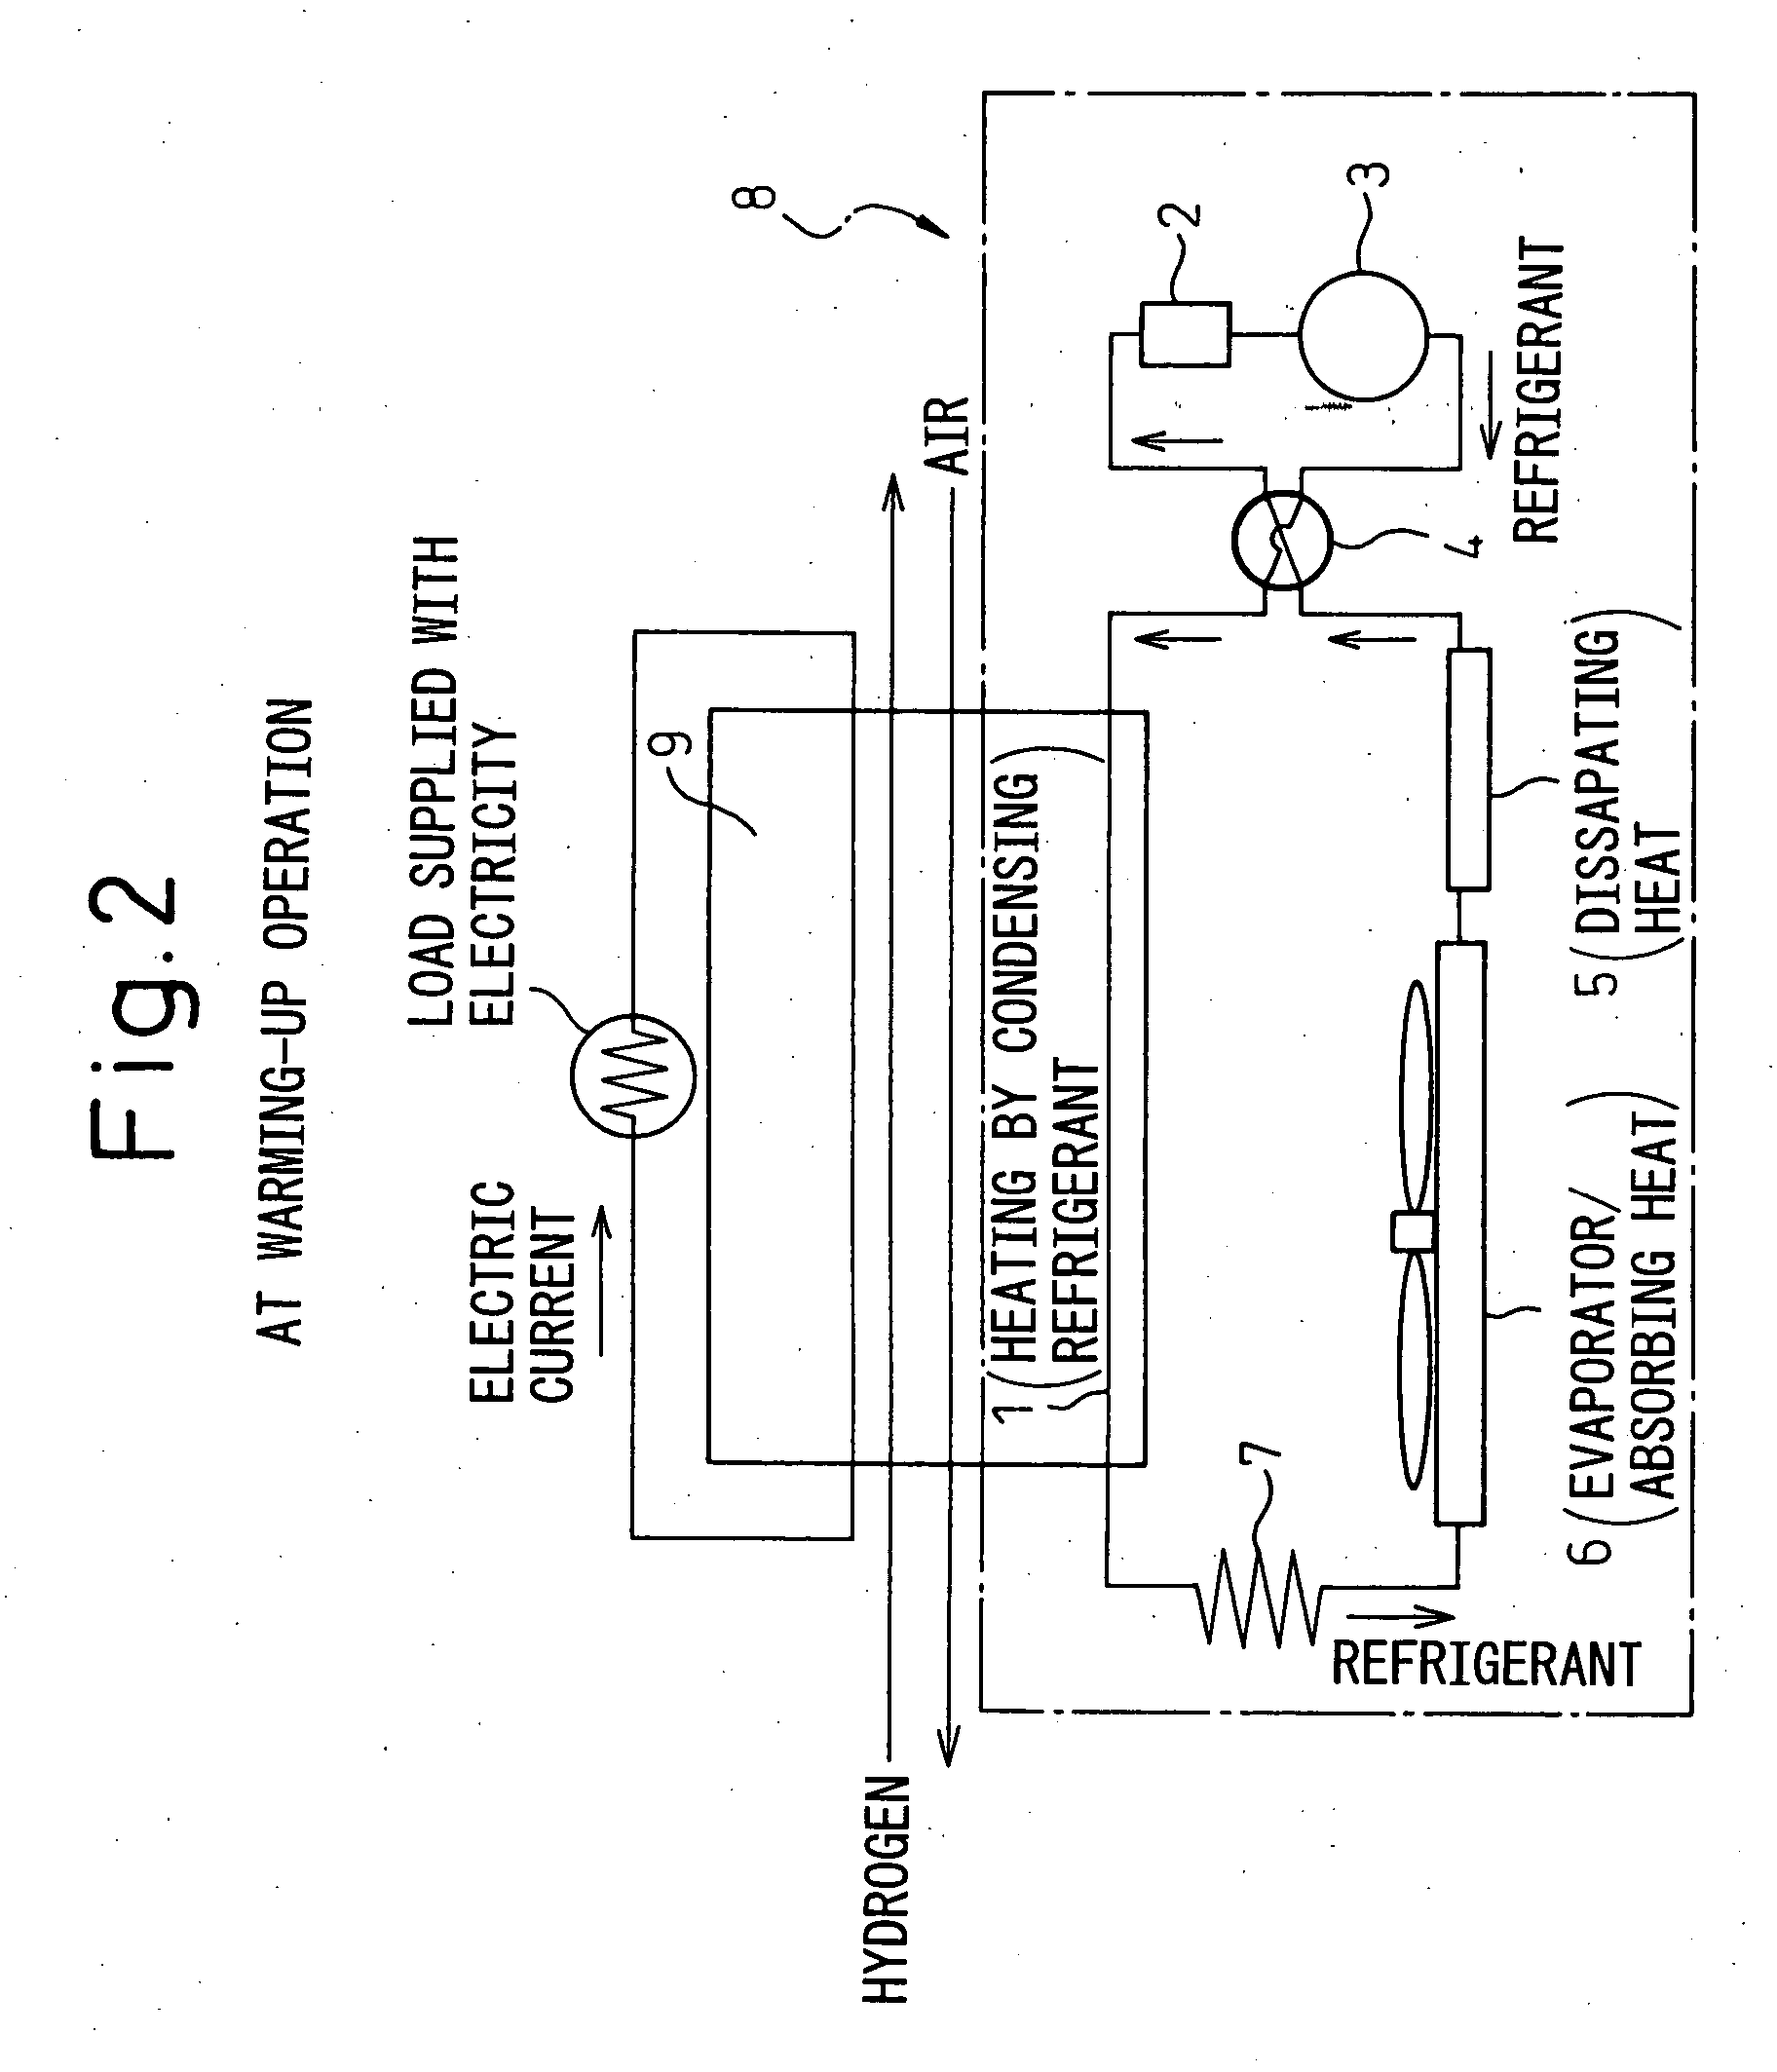 Cooling apparatus for fuel cell utilizing air conditioning system